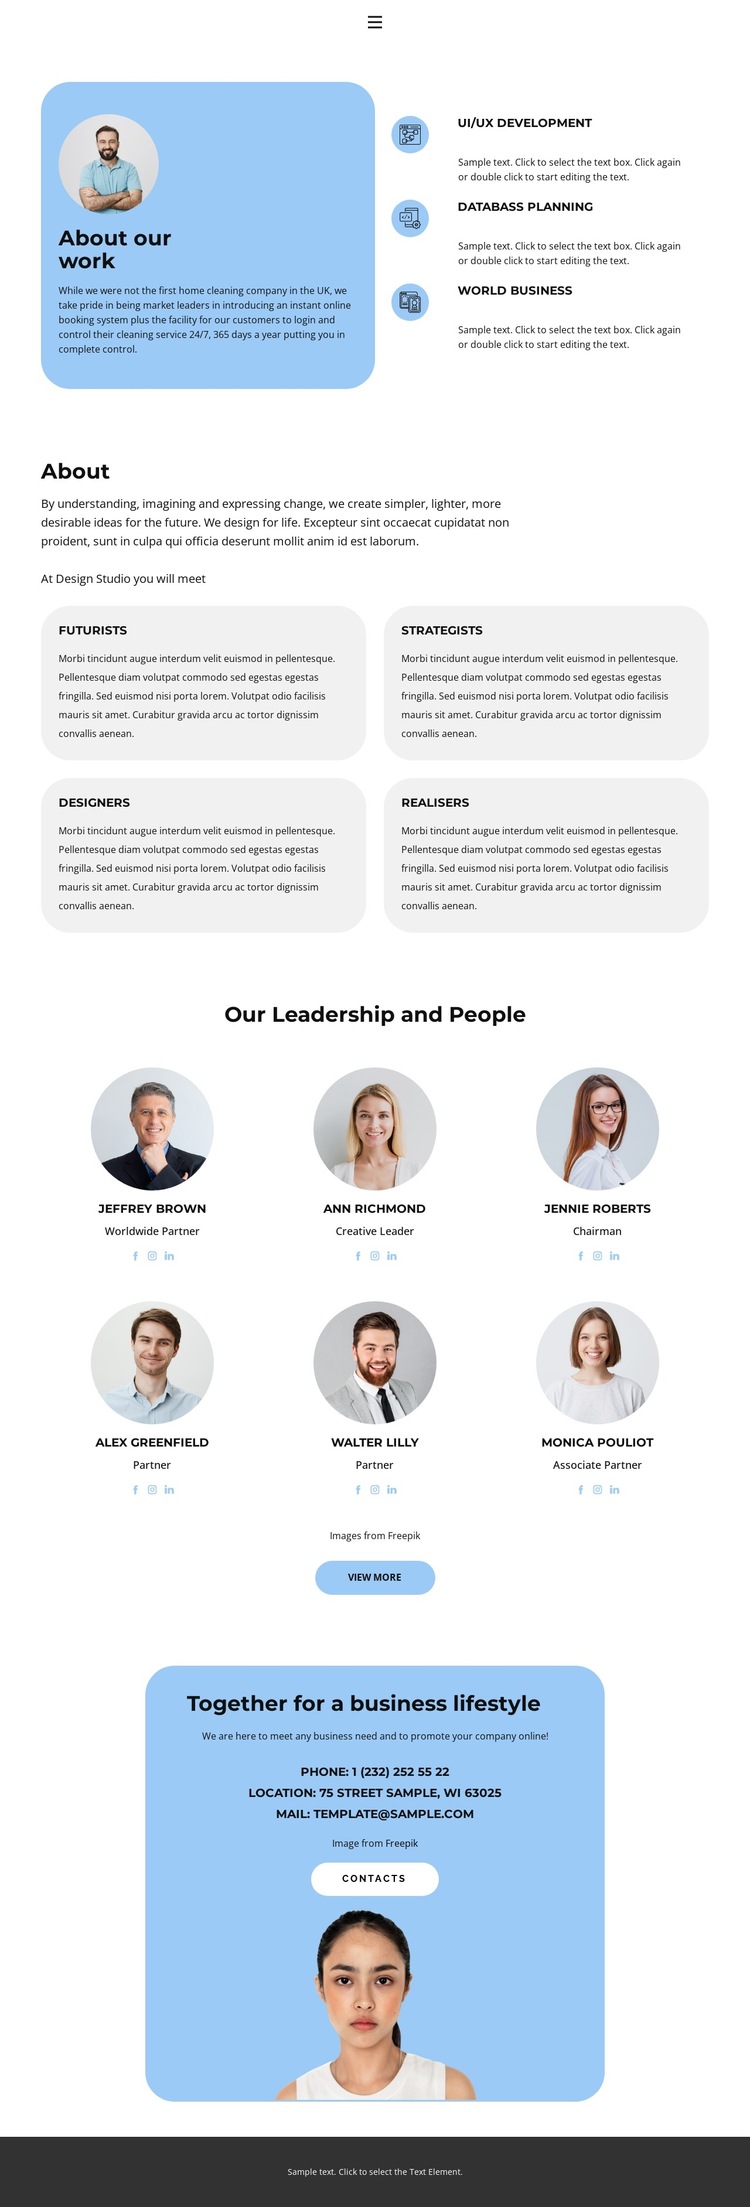 We work together HTML5 Template